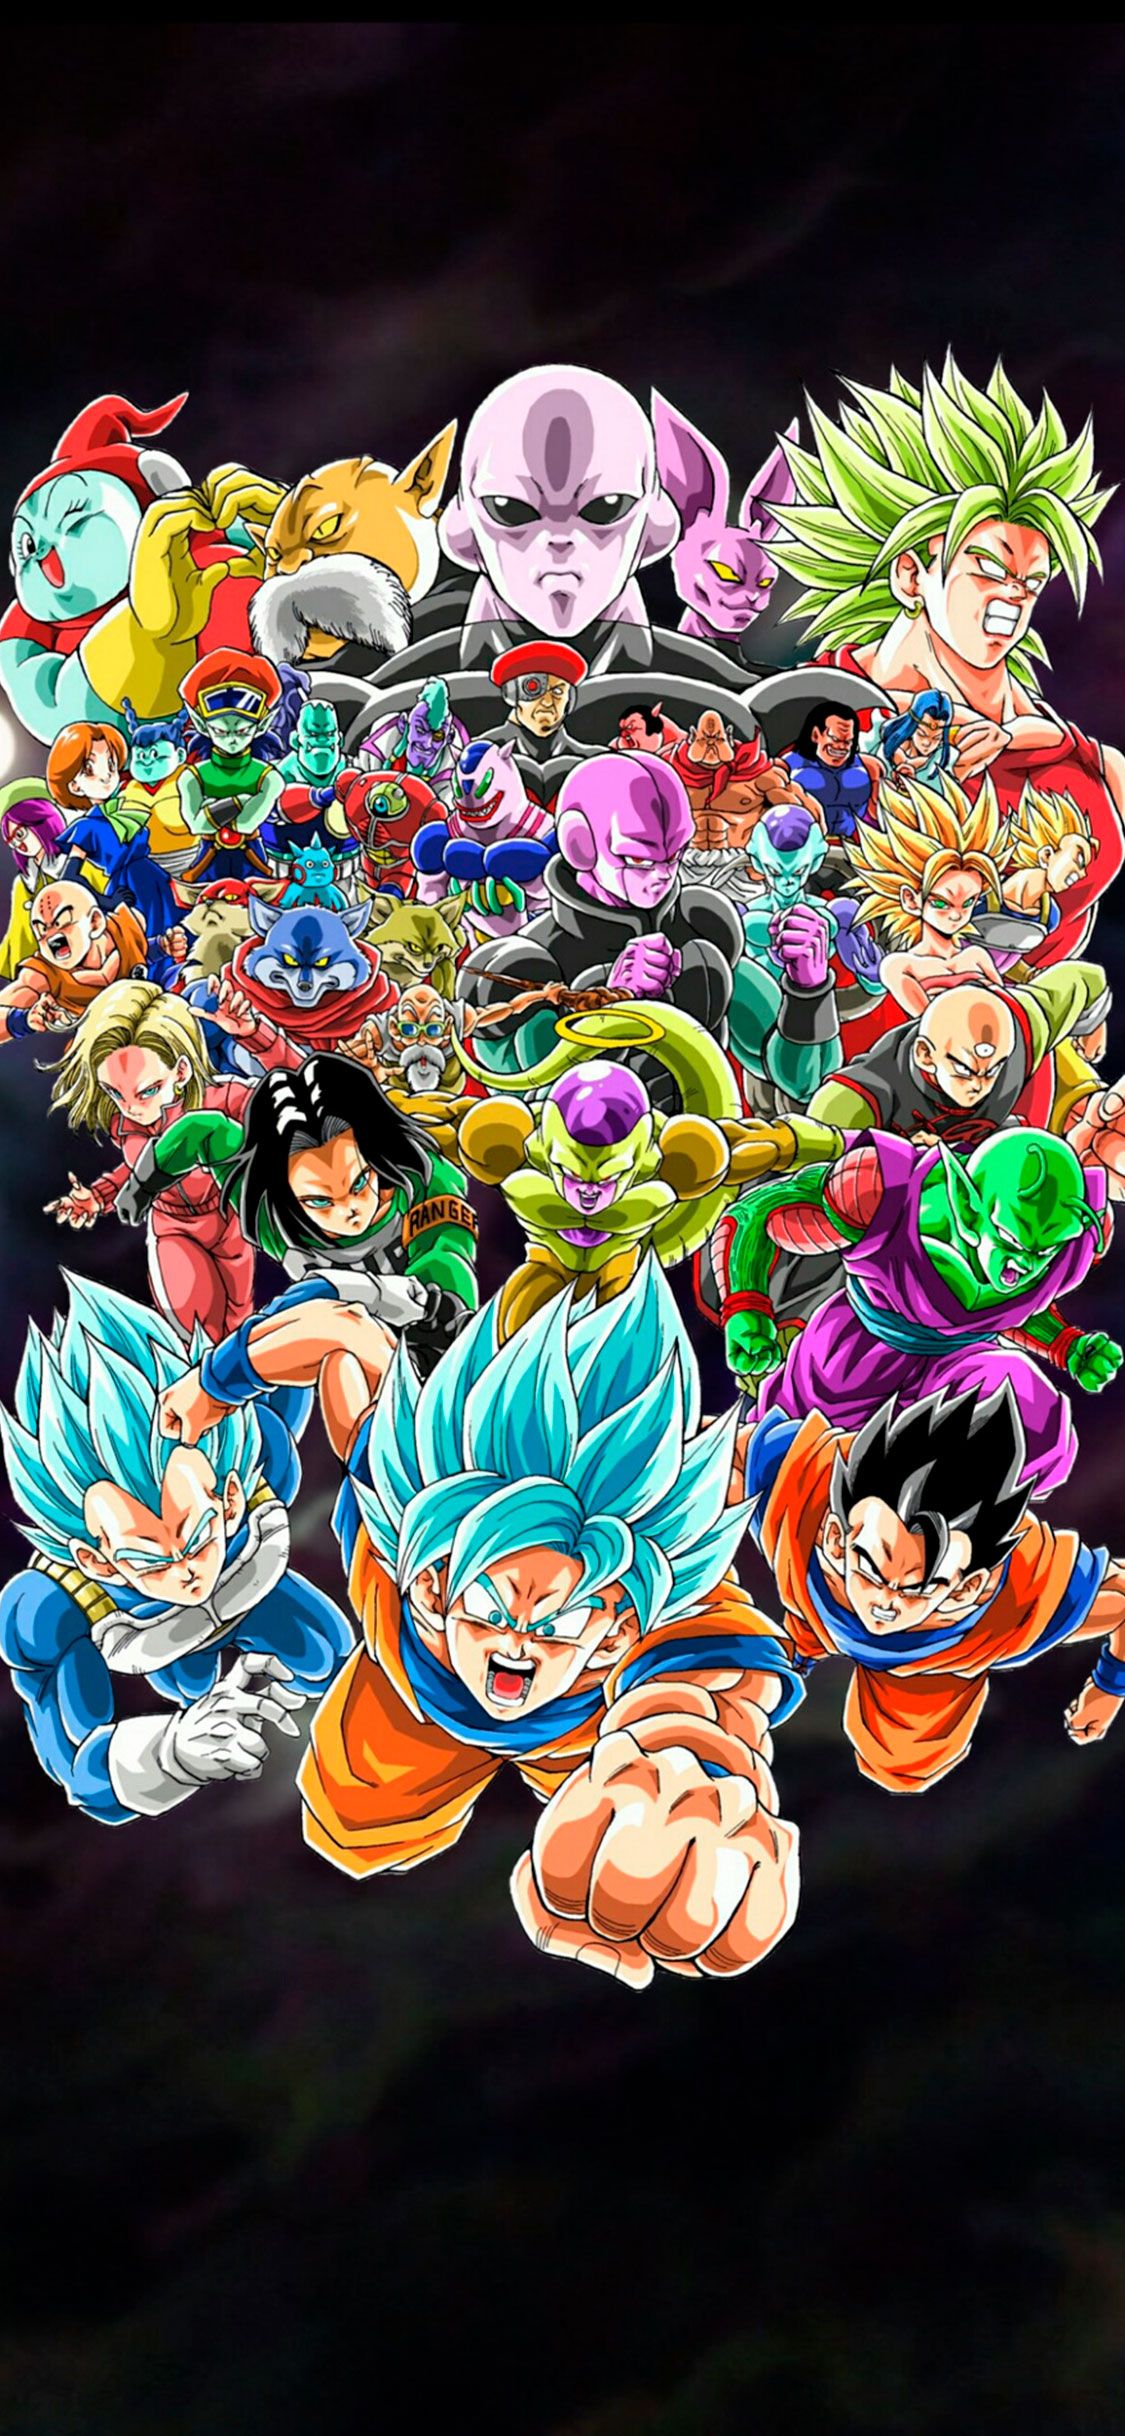 iPhone Wallpapers - Wallpapers for iPhone 8, iPhone X and iPhone 7  Dragon  ball super wallpapers, Dragon ball wallpapers, Dragon ball wallpaper iphone